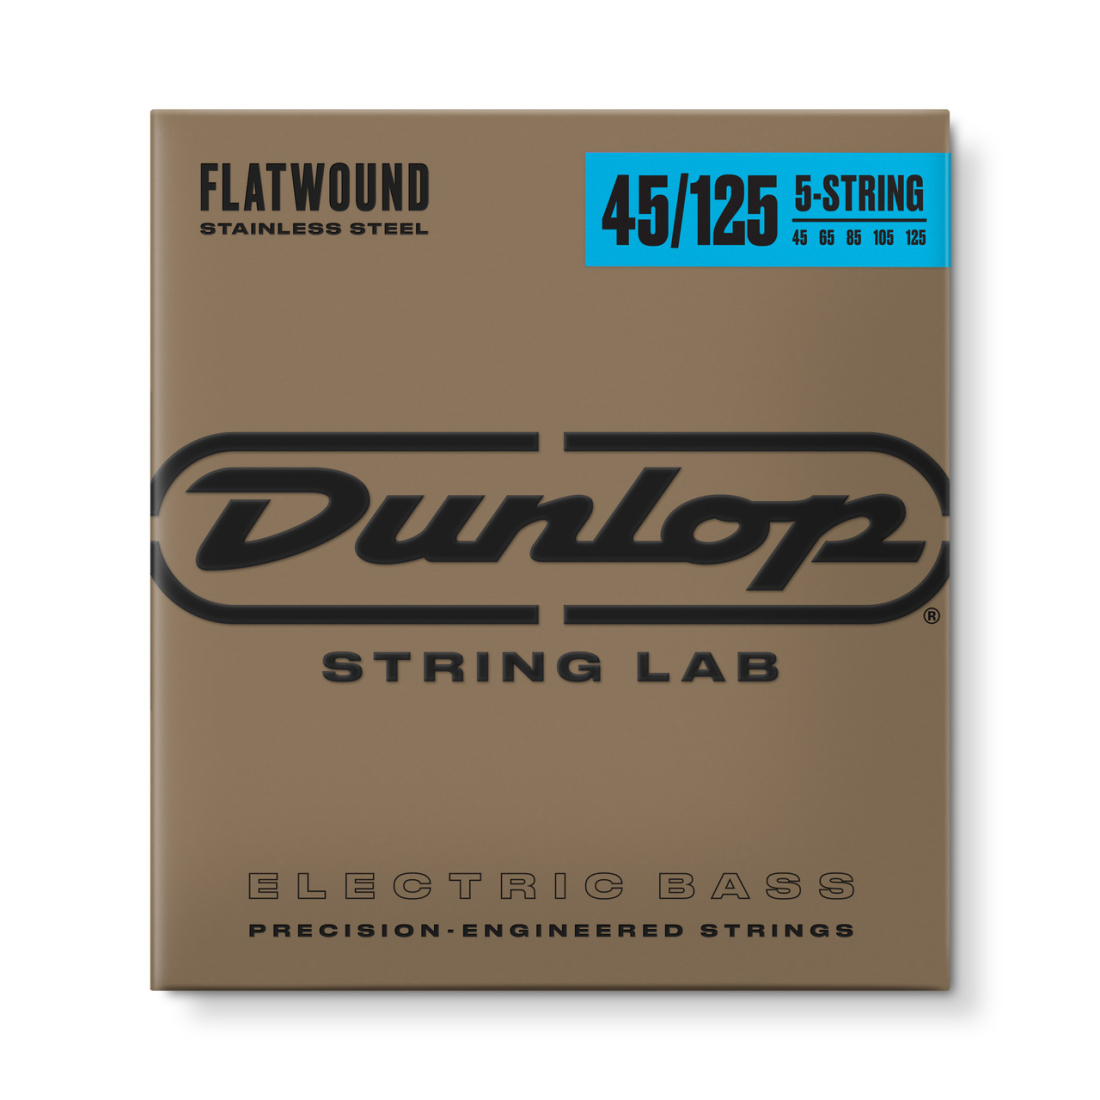 Stainless Steel Flatwound Bass Strings, 45-125 - 5-String